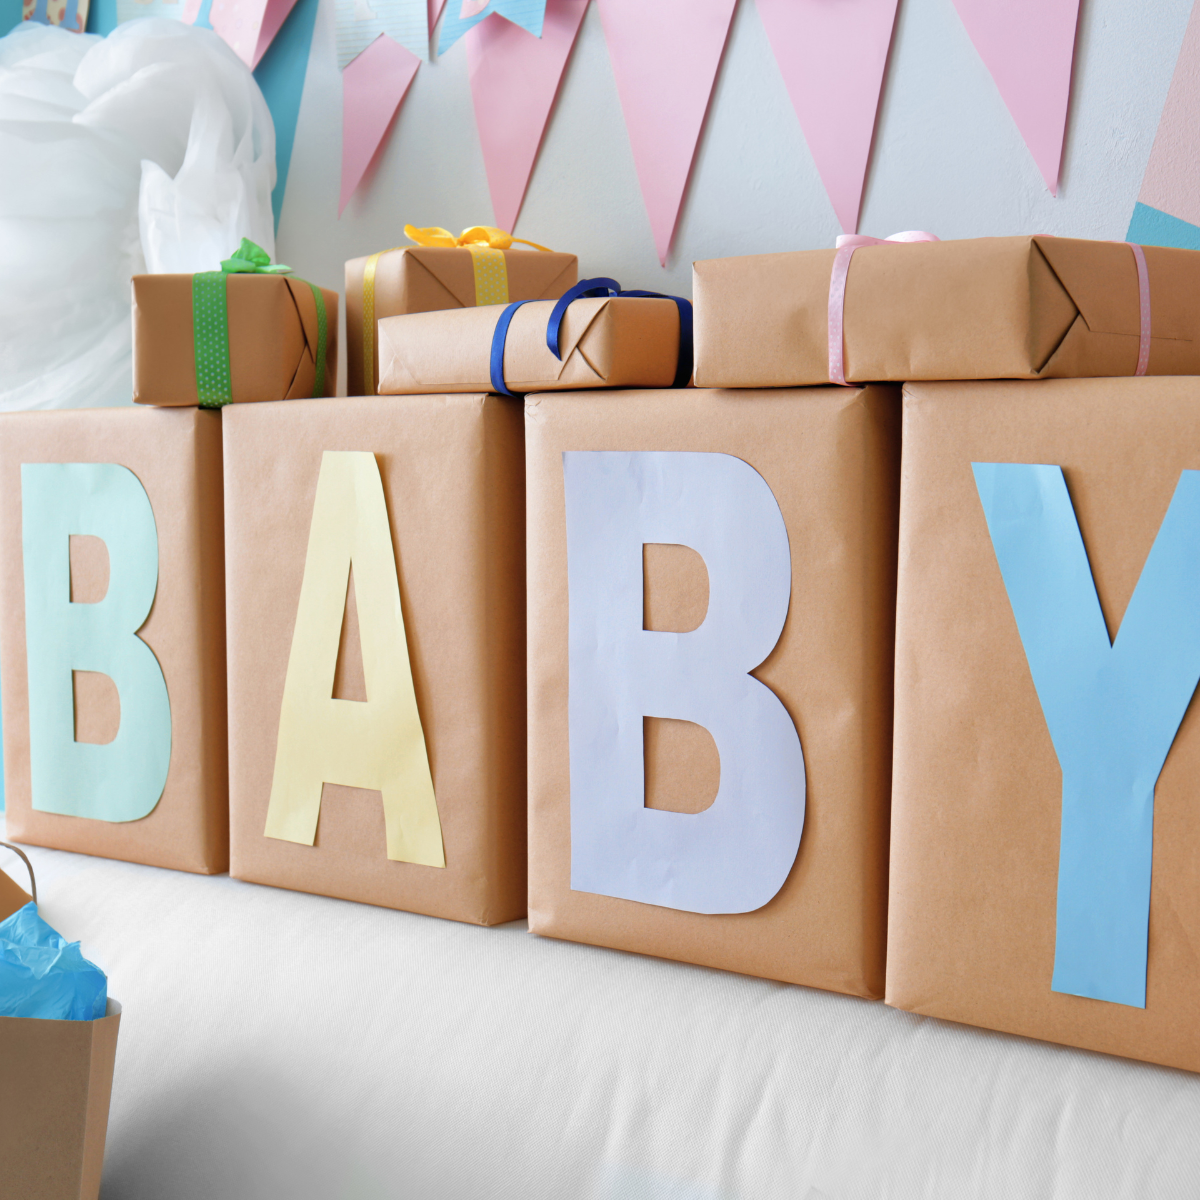 Baby party to announce your pregnancy